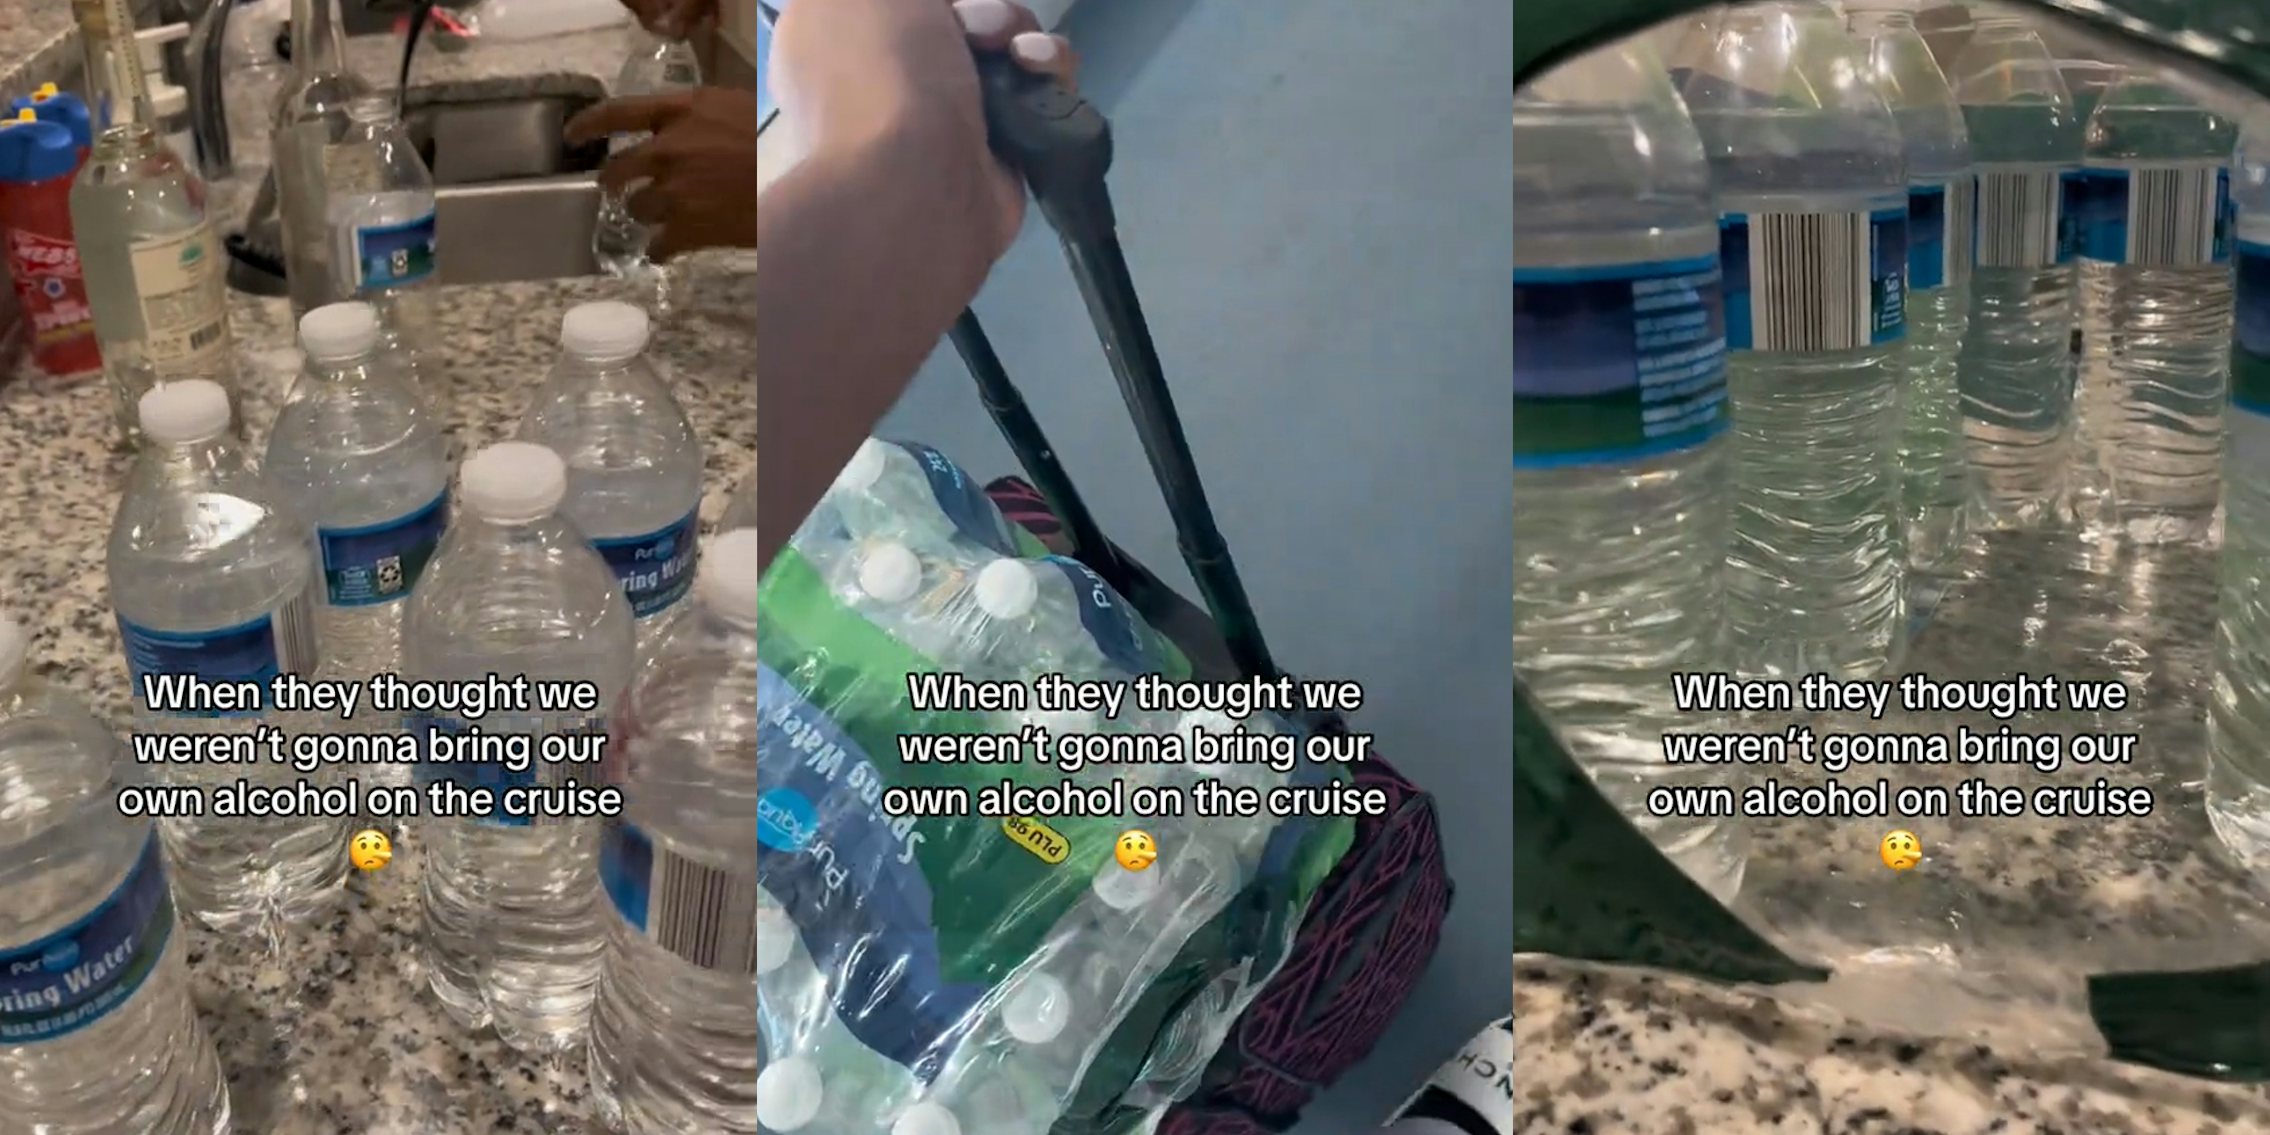 water bottles with caption 'When they thought we weren't gonna bring our own alcohol on the cruise' (l) hand pulling luggage with water bottles with caption 'When they thought we weren't gonna bring our own alcohol on the cruise' (c) water bottles with caption 'When they thought we weren't gonna bring our own alcohol on the cruise' (r)